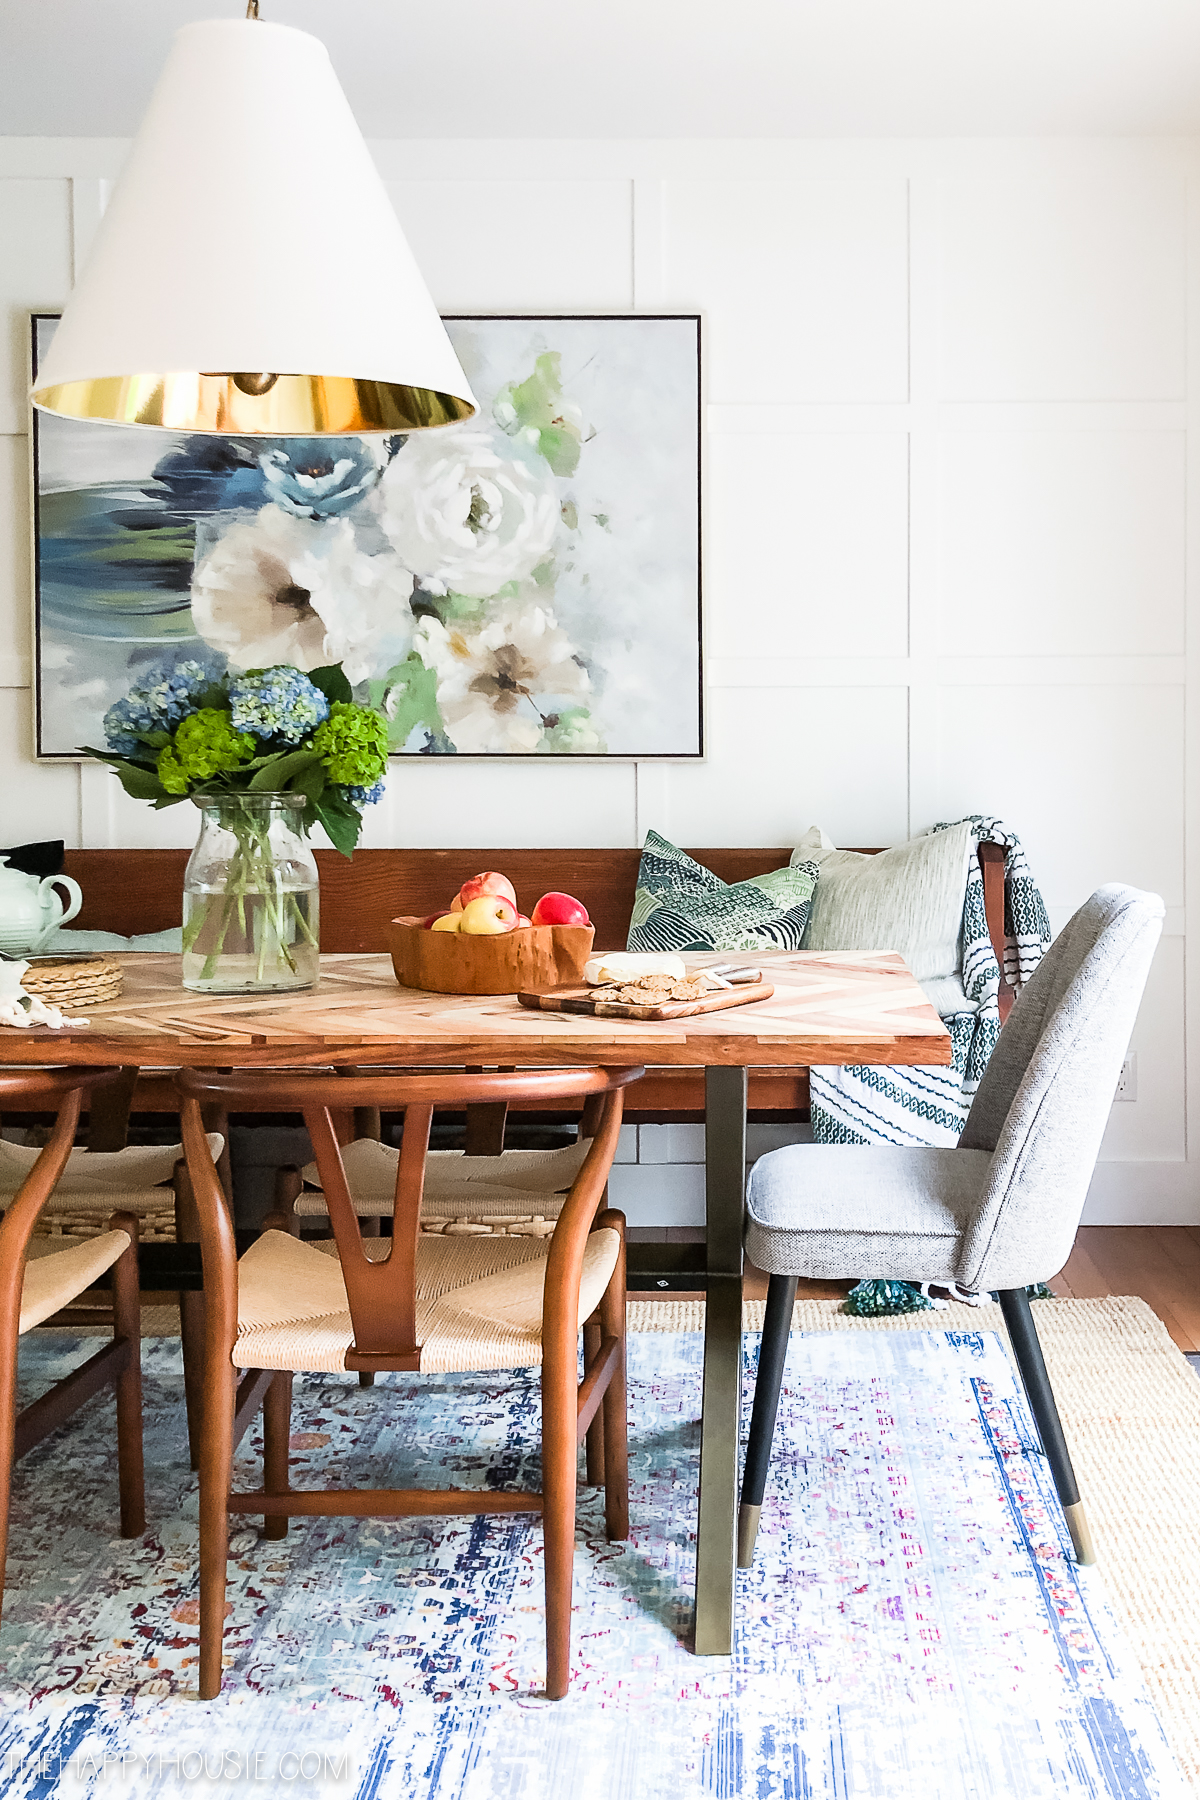 Fall Home Tour: 5 Simple Ways to Create a Cozy Fall Home